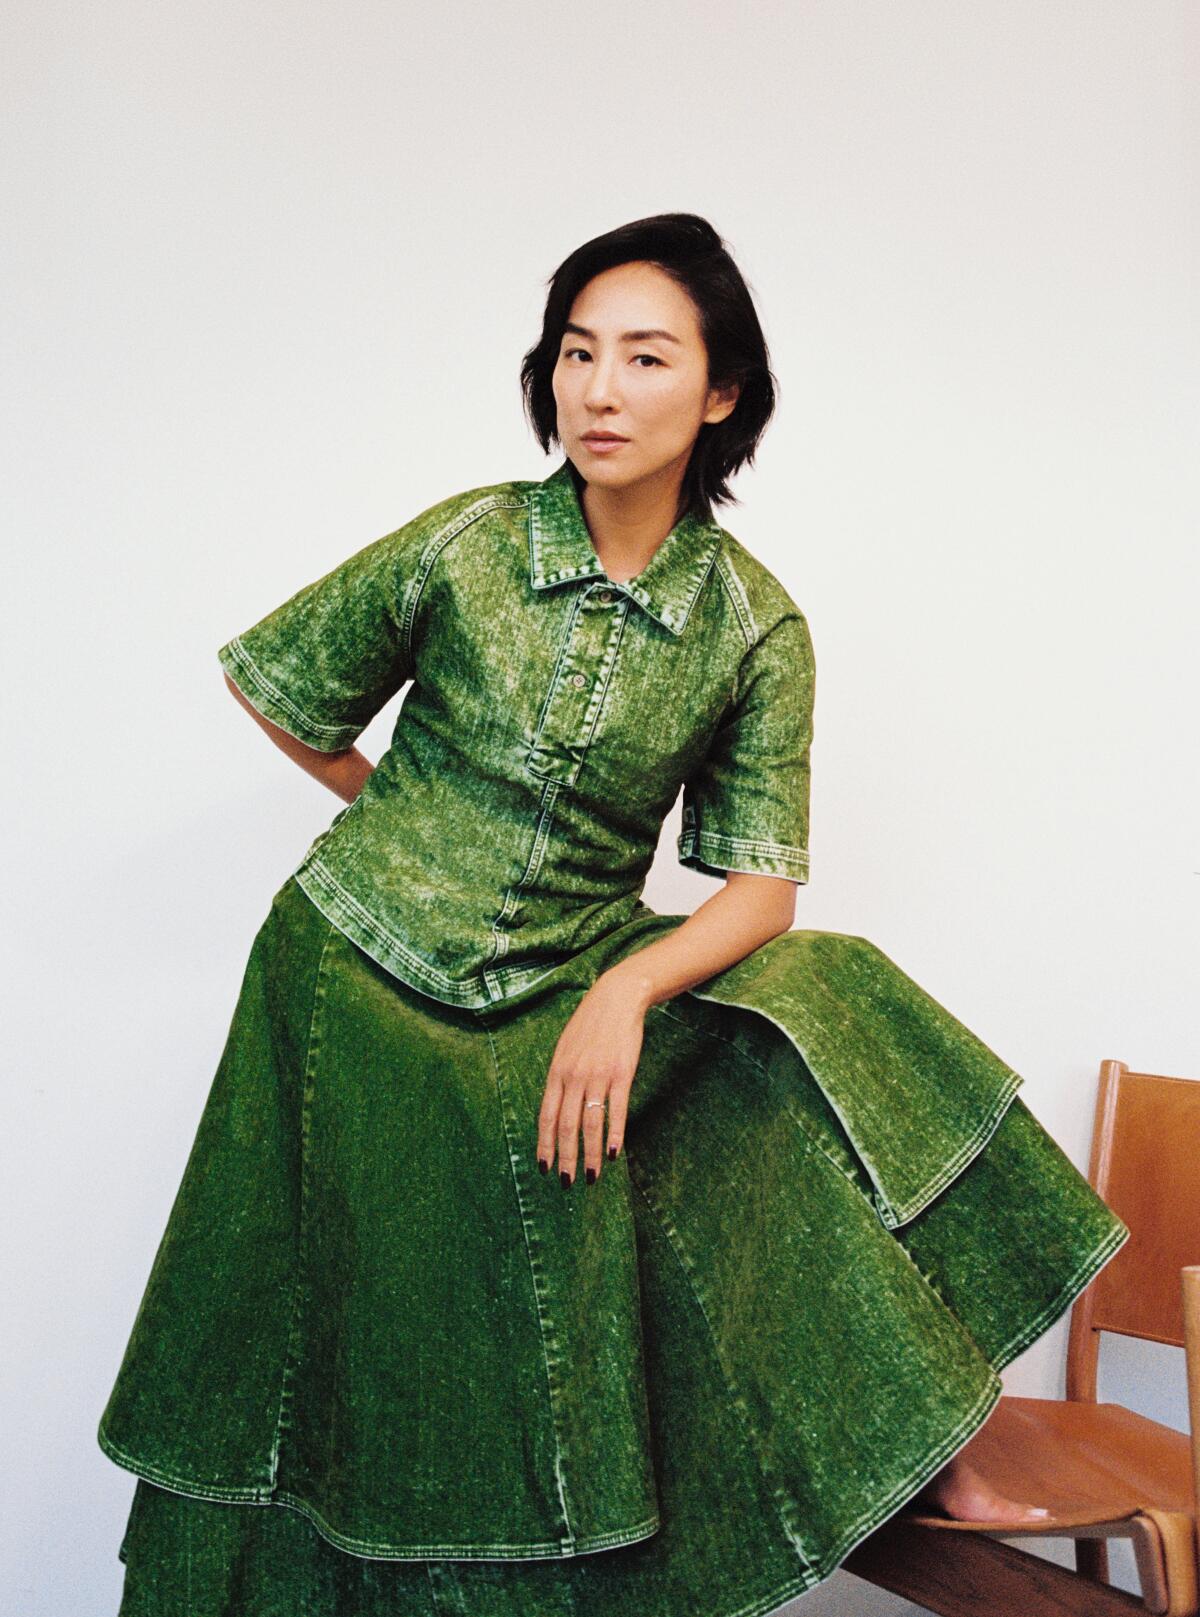 Greta Lee rests one foot on a chair, leaning onto that raised leg for a portrait.